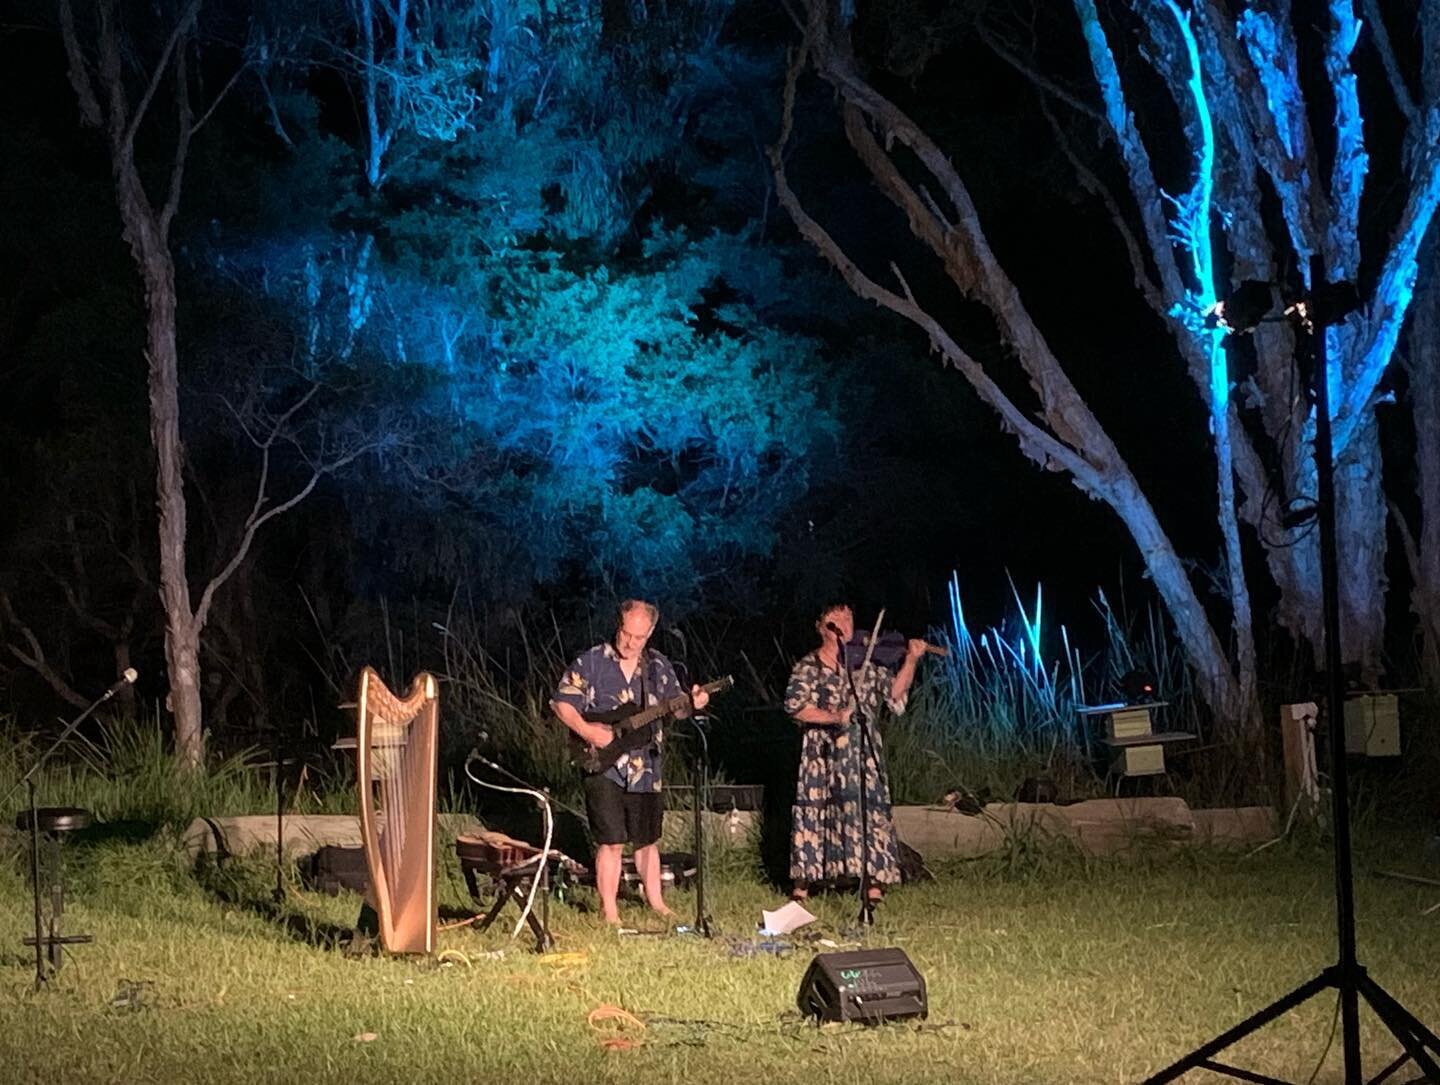 Fabulous concert on Coochie last weekend. Tidal Moon are local musicians, Barbara and Jose. The were joined by Melbourne duo Green Fieldz. Terrific music!! So entertaining. Thank you so much 💙💚🌟🌙
#coochiemudloisland #tidalmoon #greenfieldz #outdo